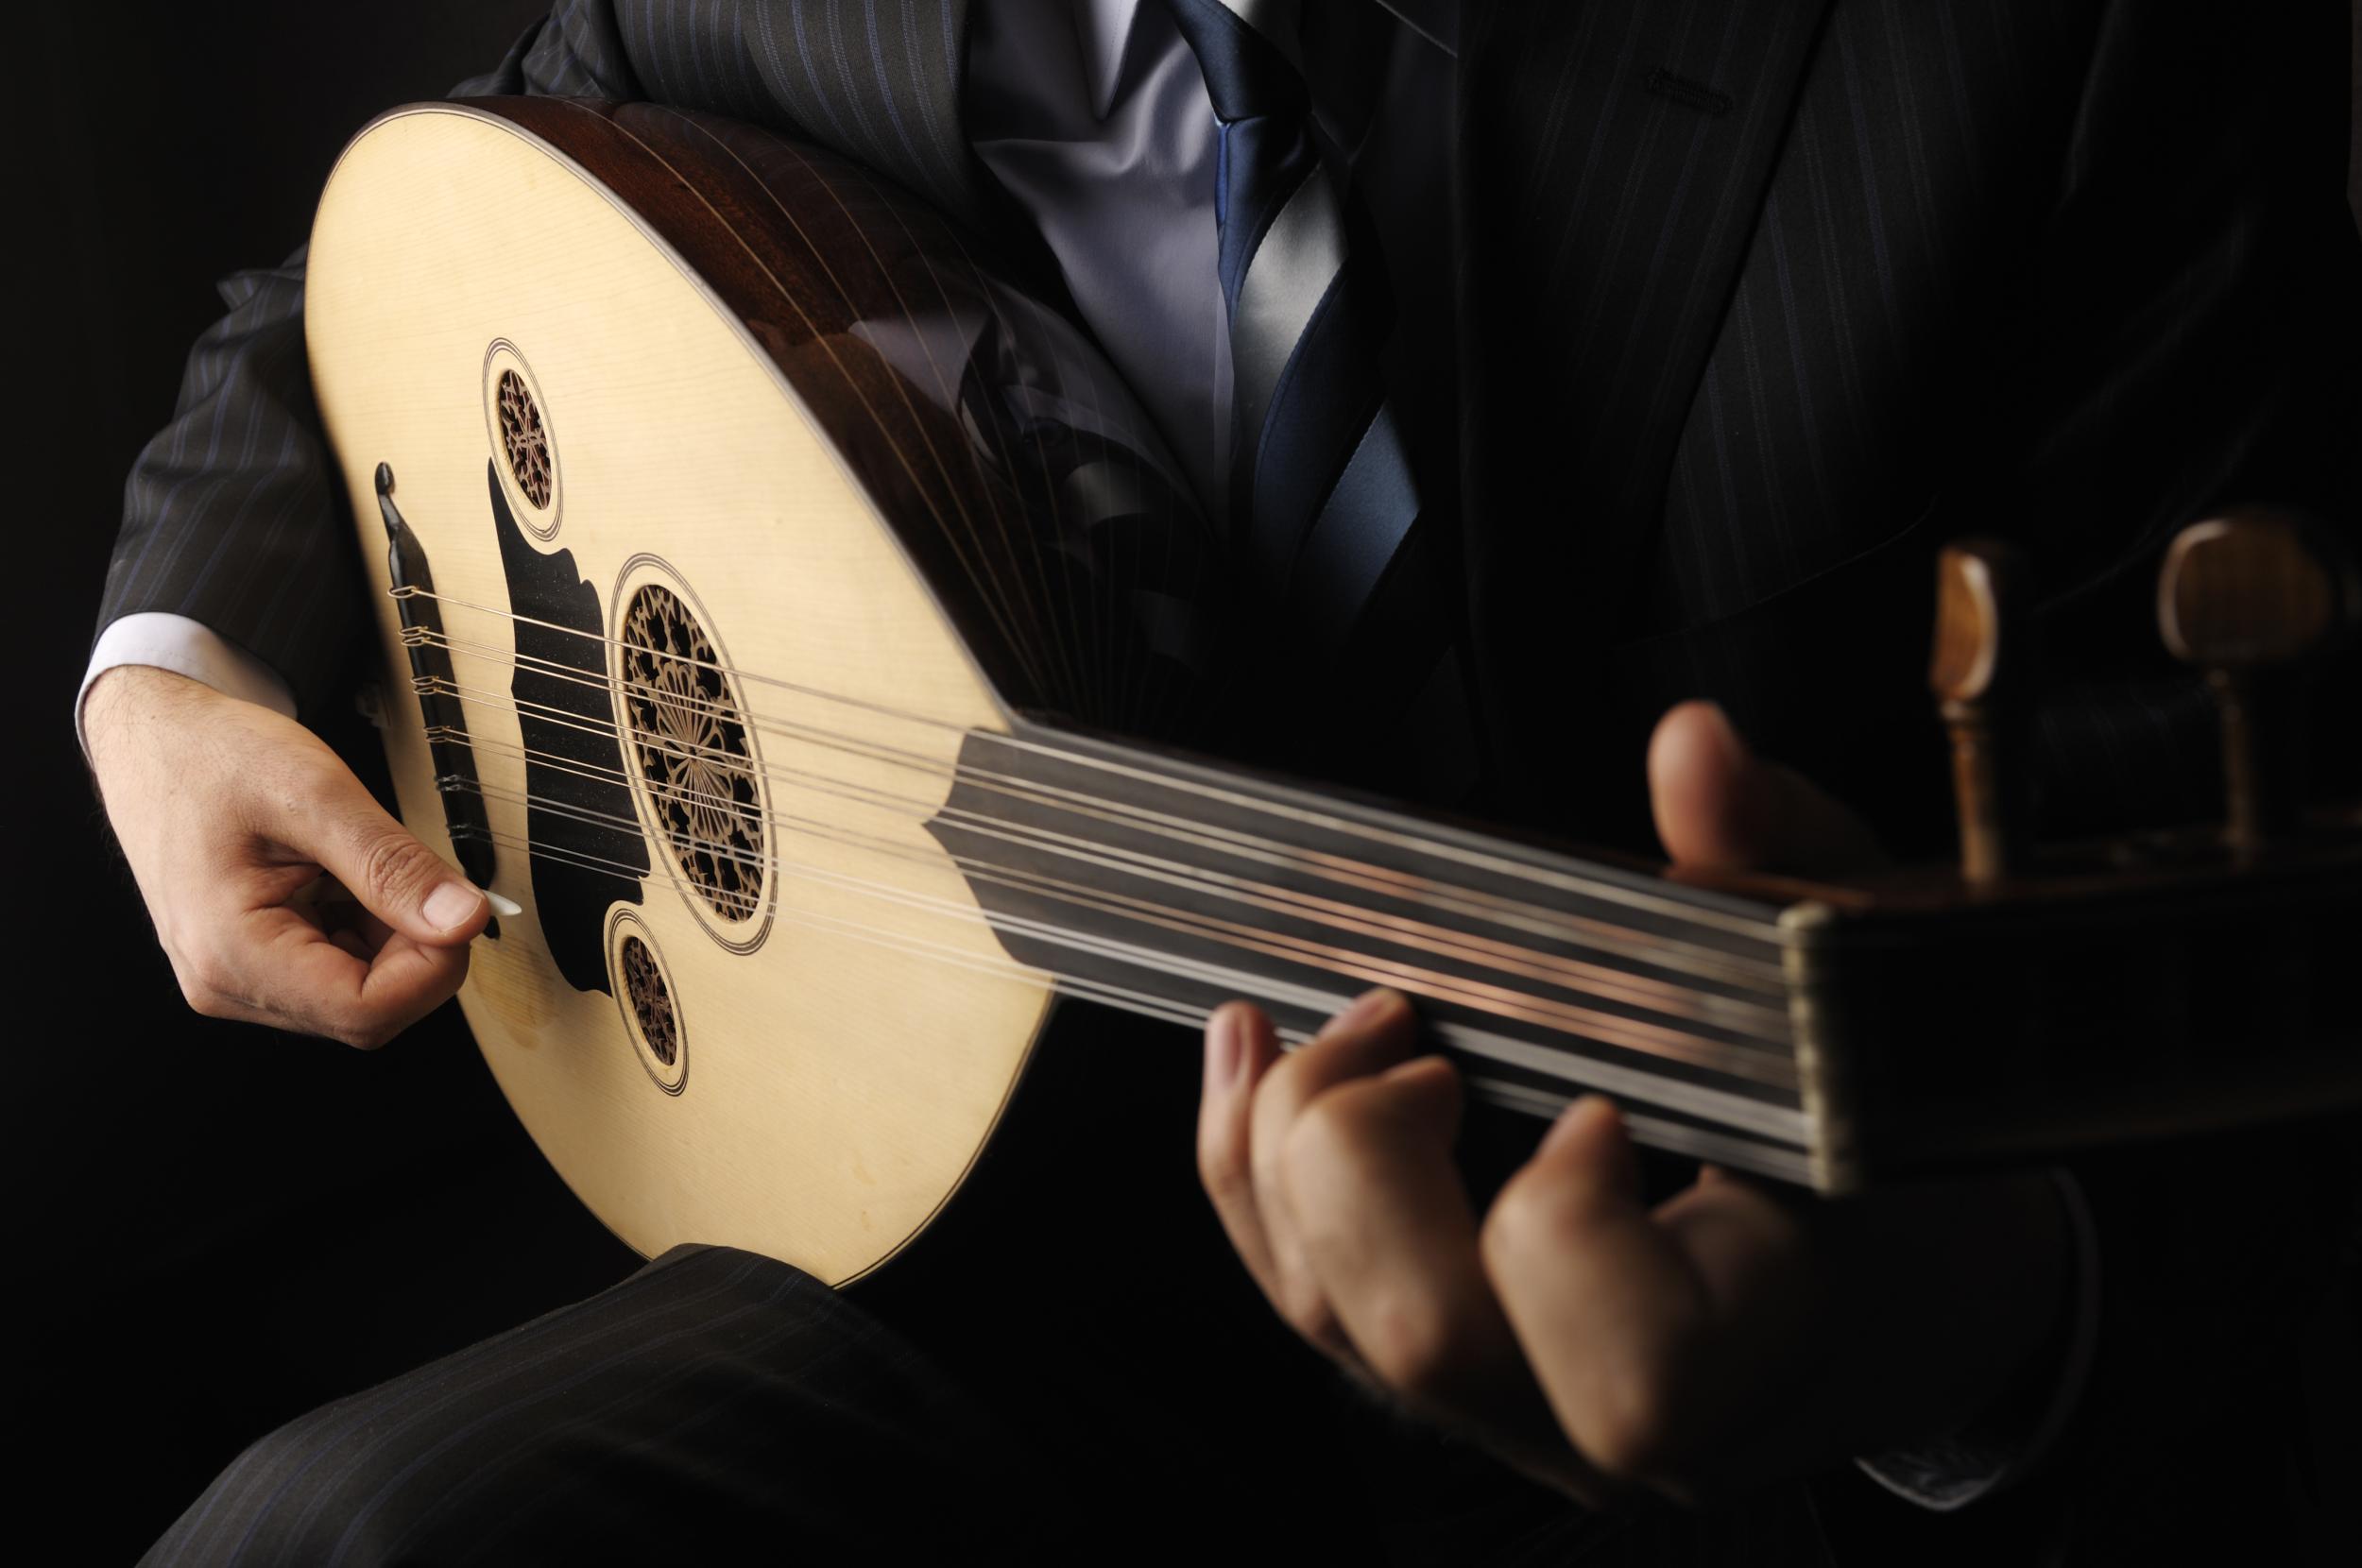 The oud: an integral instrument of North Africa and the Middle East